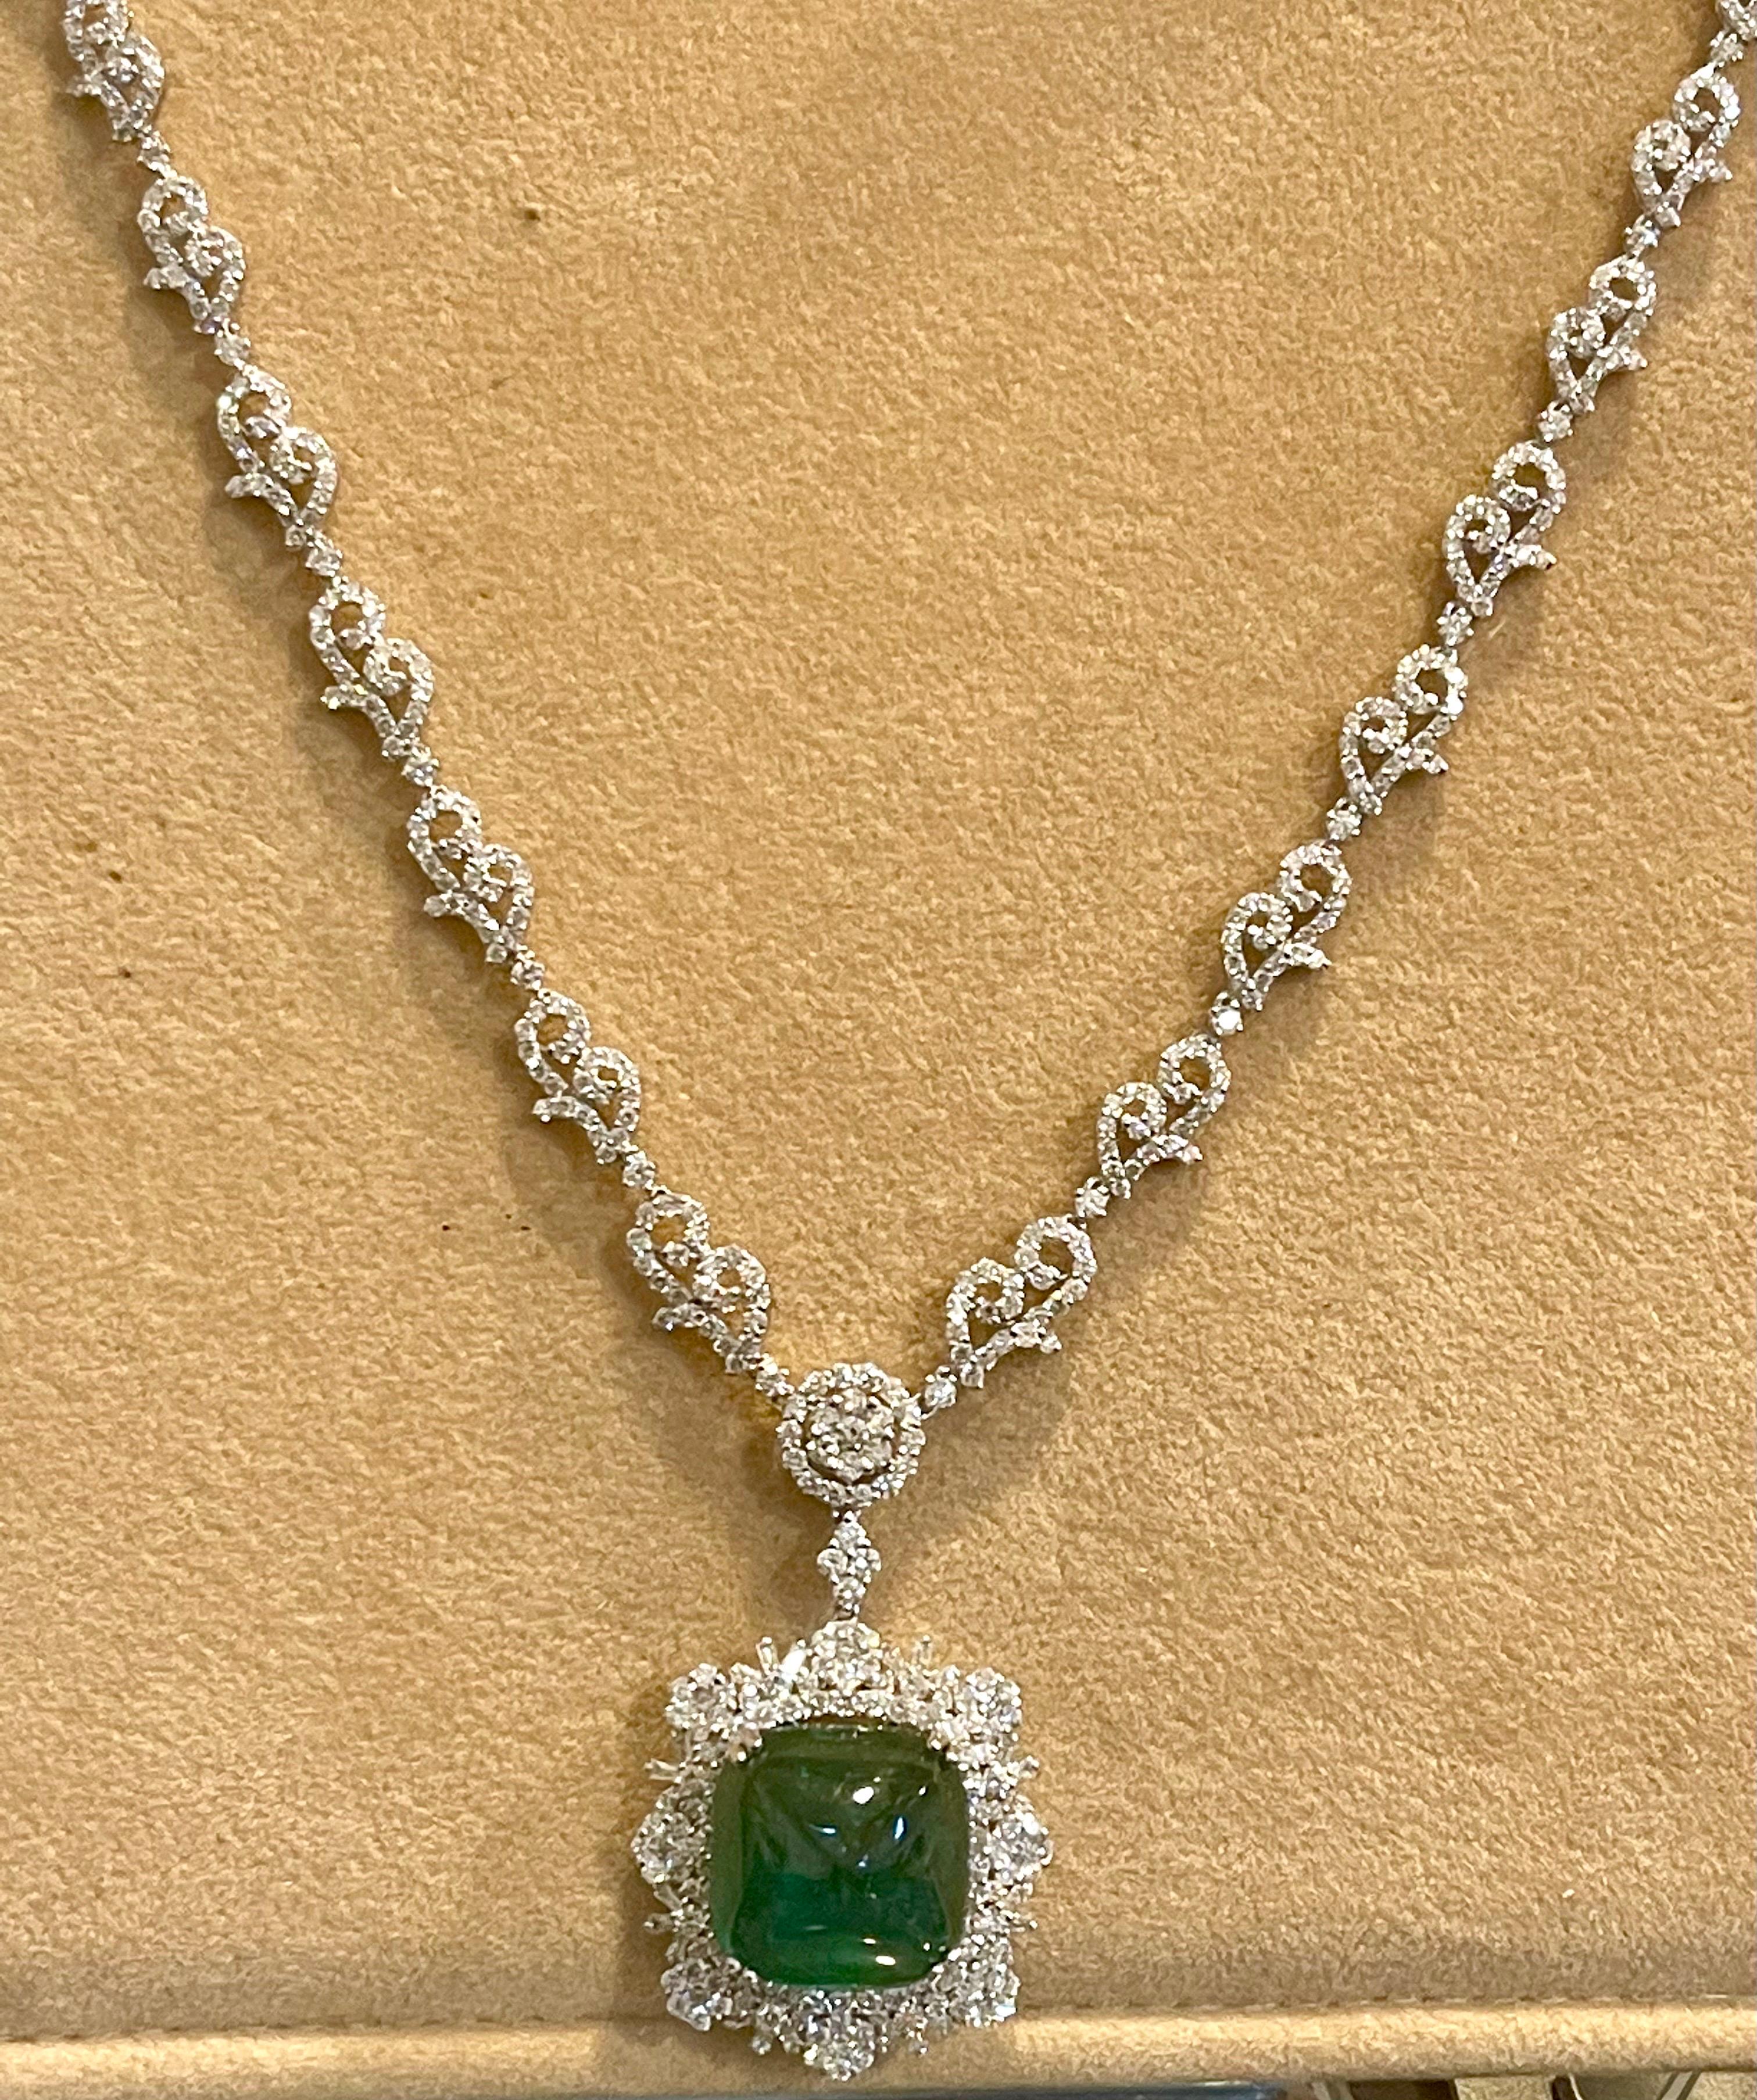 GIA 17 Ct Sugar Loaf Cabochon Colombian Emerald & 13 Ct Diamond Necklace 18KWG For Sale 2